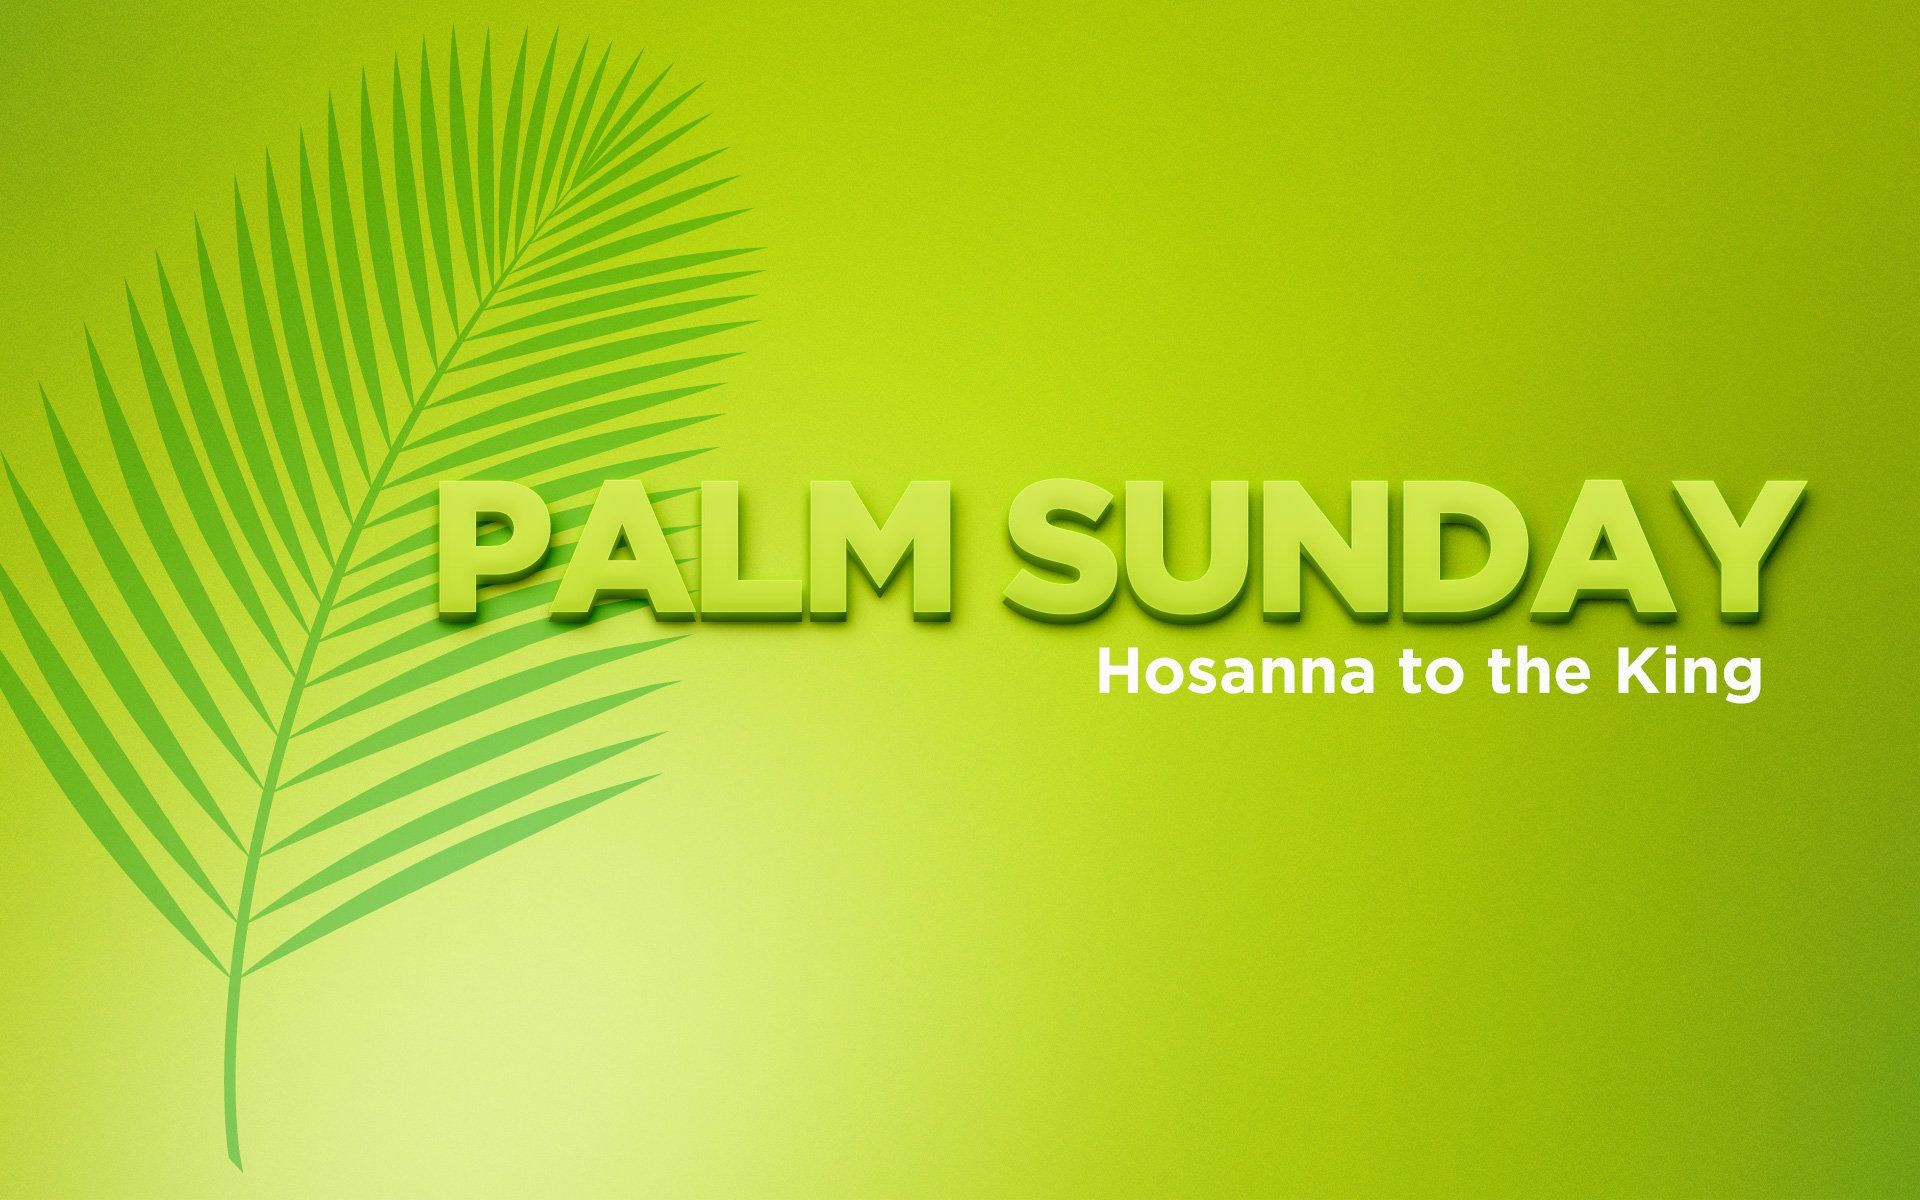 Free download Palm sunday wallpaper 2015 Palm sunday wallpaper 2015 download [1920x1200] for your Desktop, Mobile & Tablet. Explore Sunday Wallpaper. Sunday Morning Wallpaper, Resurrection Sunday Wallpaper, Easter Sunday Wallpaper for Widescreen